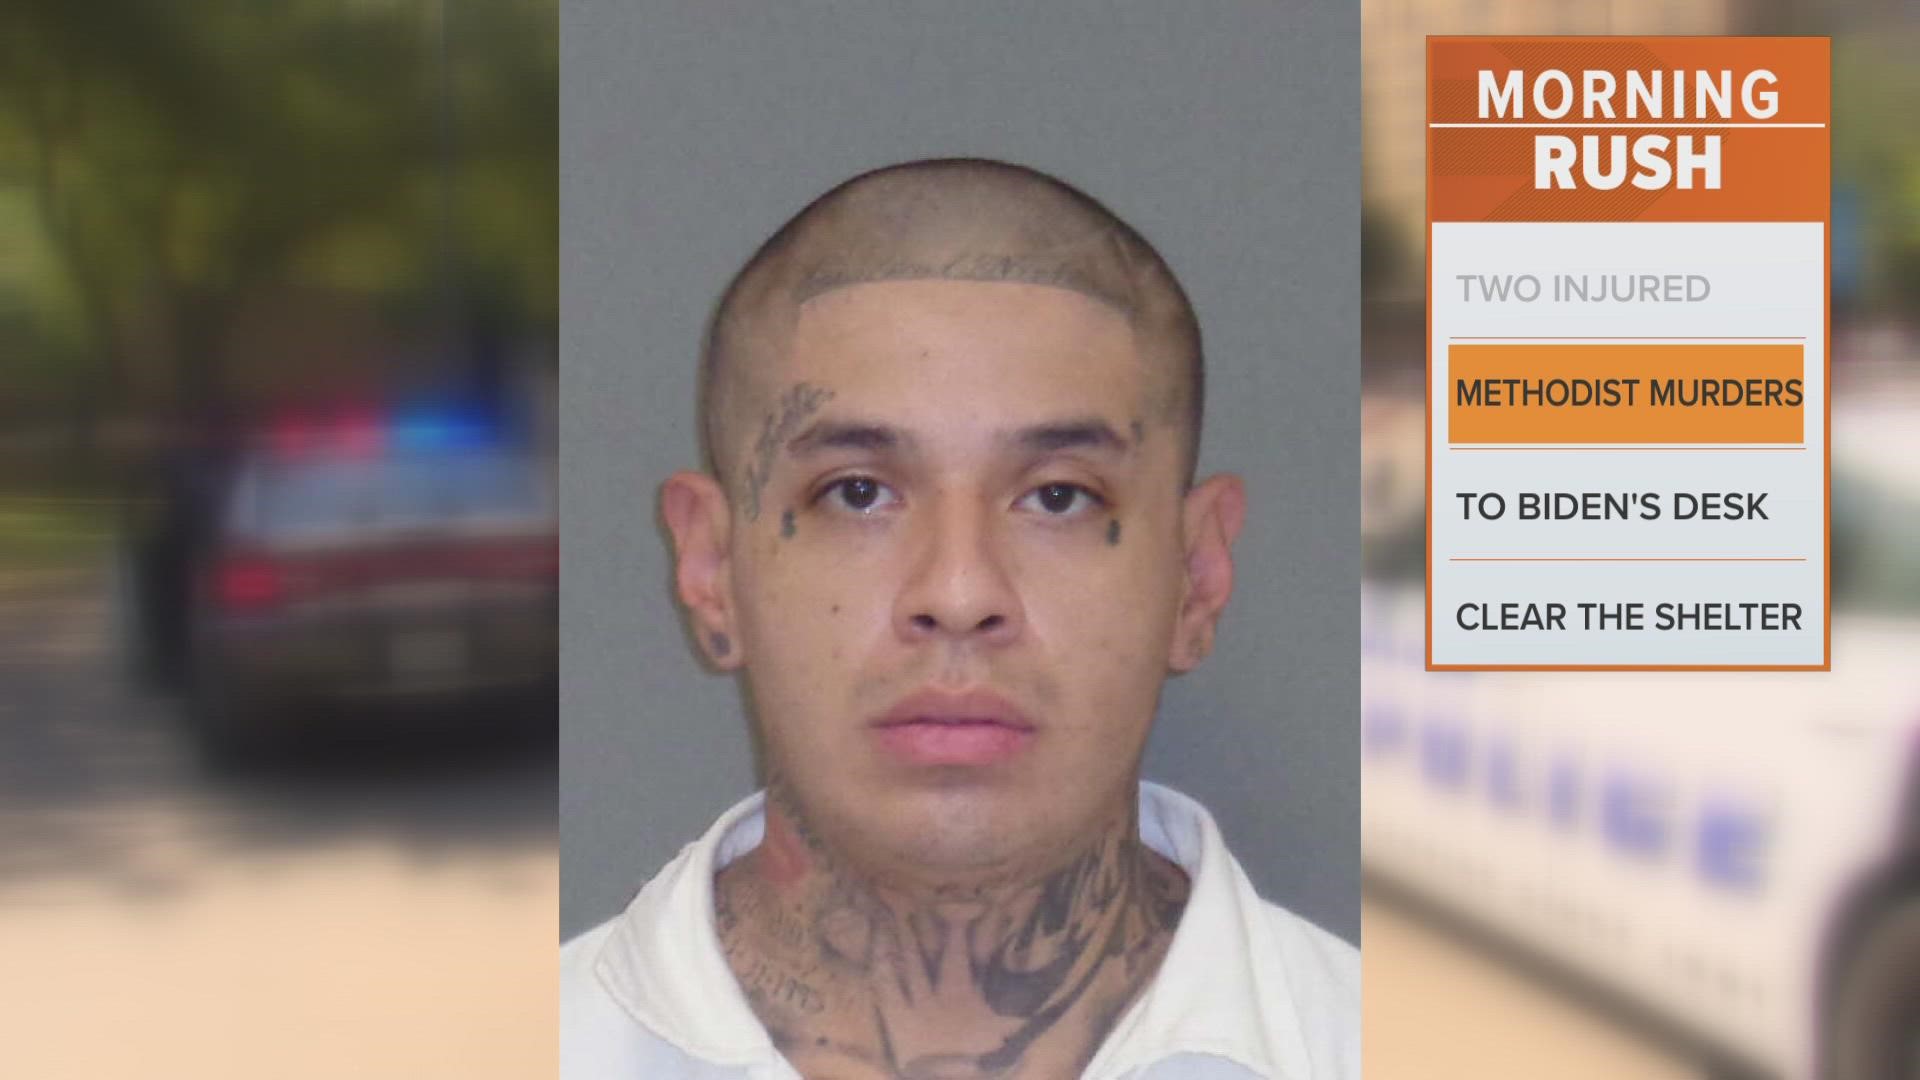 Hernandez is currently in the Dallas County jail in lieu of a $3 million bond.